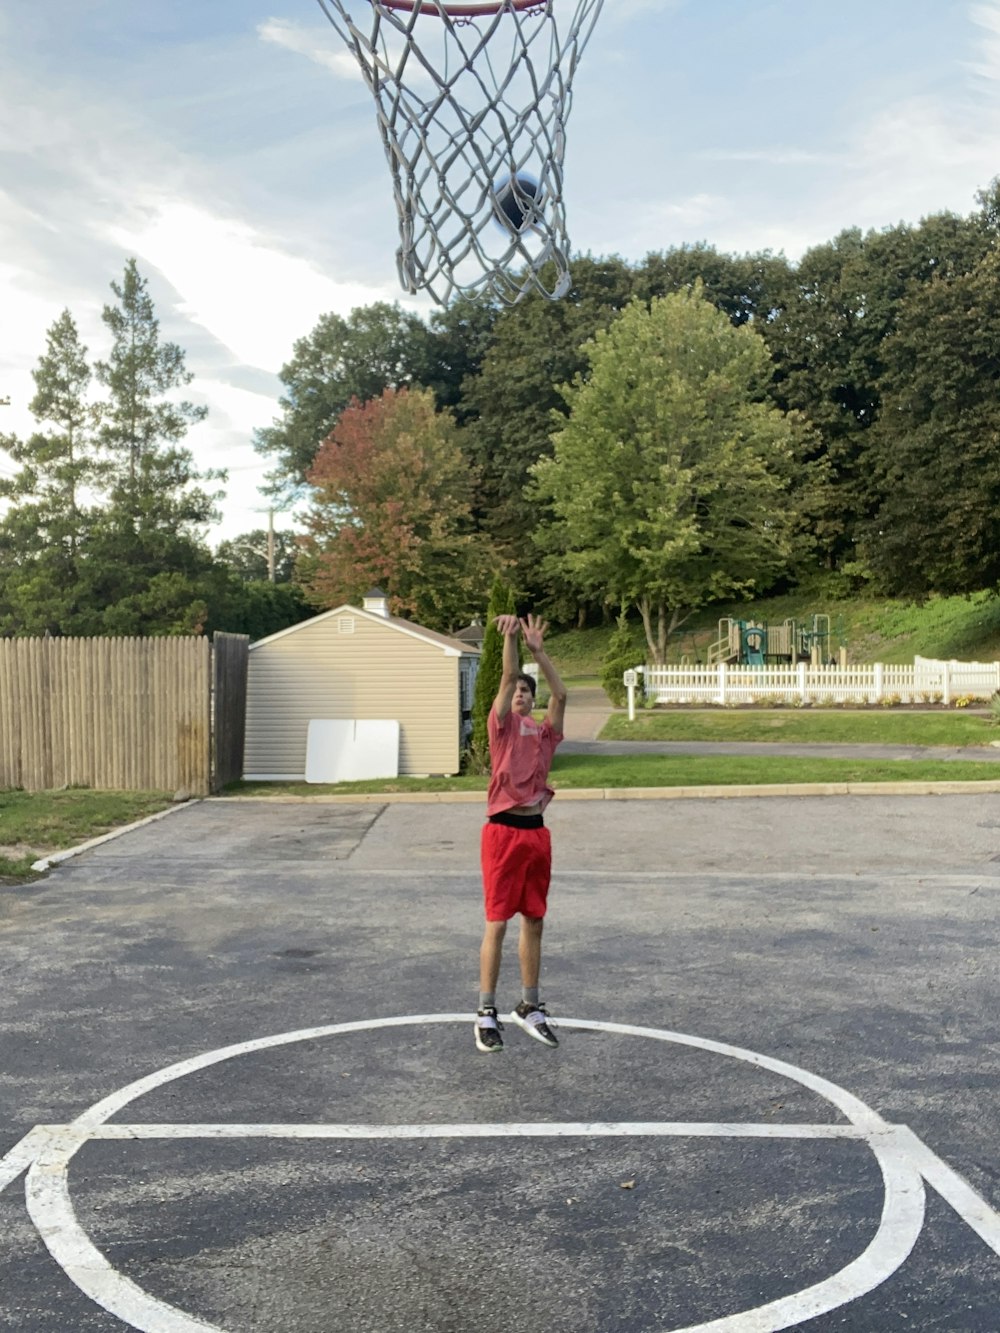 a man in a red shirt is playing basketball